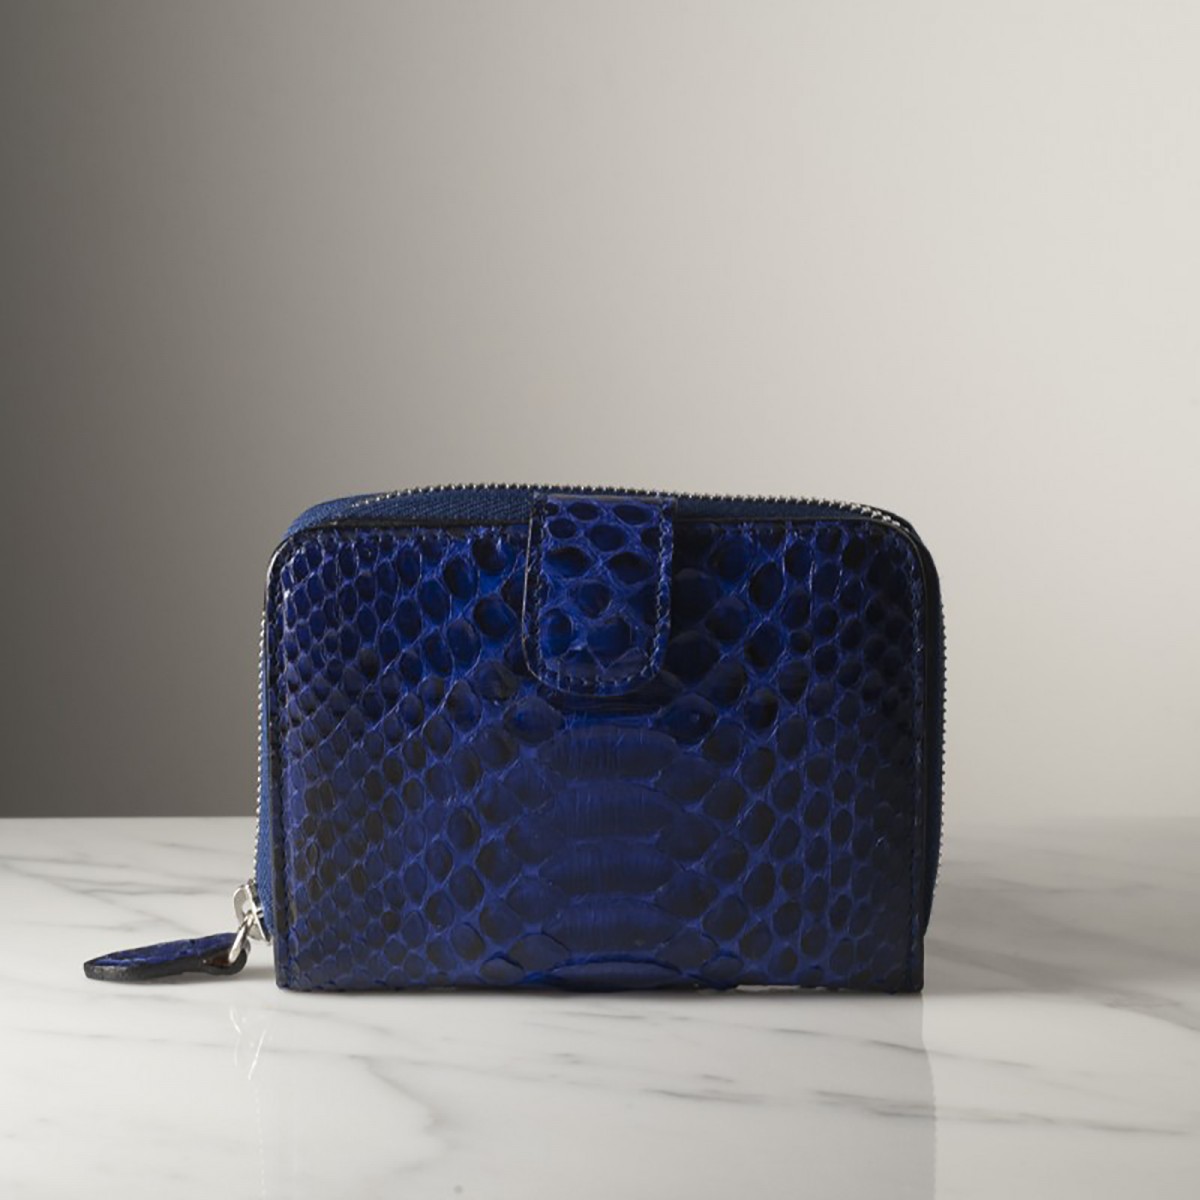 HUGUETTE PYTHON - Python leather wallet, handmade in Italy